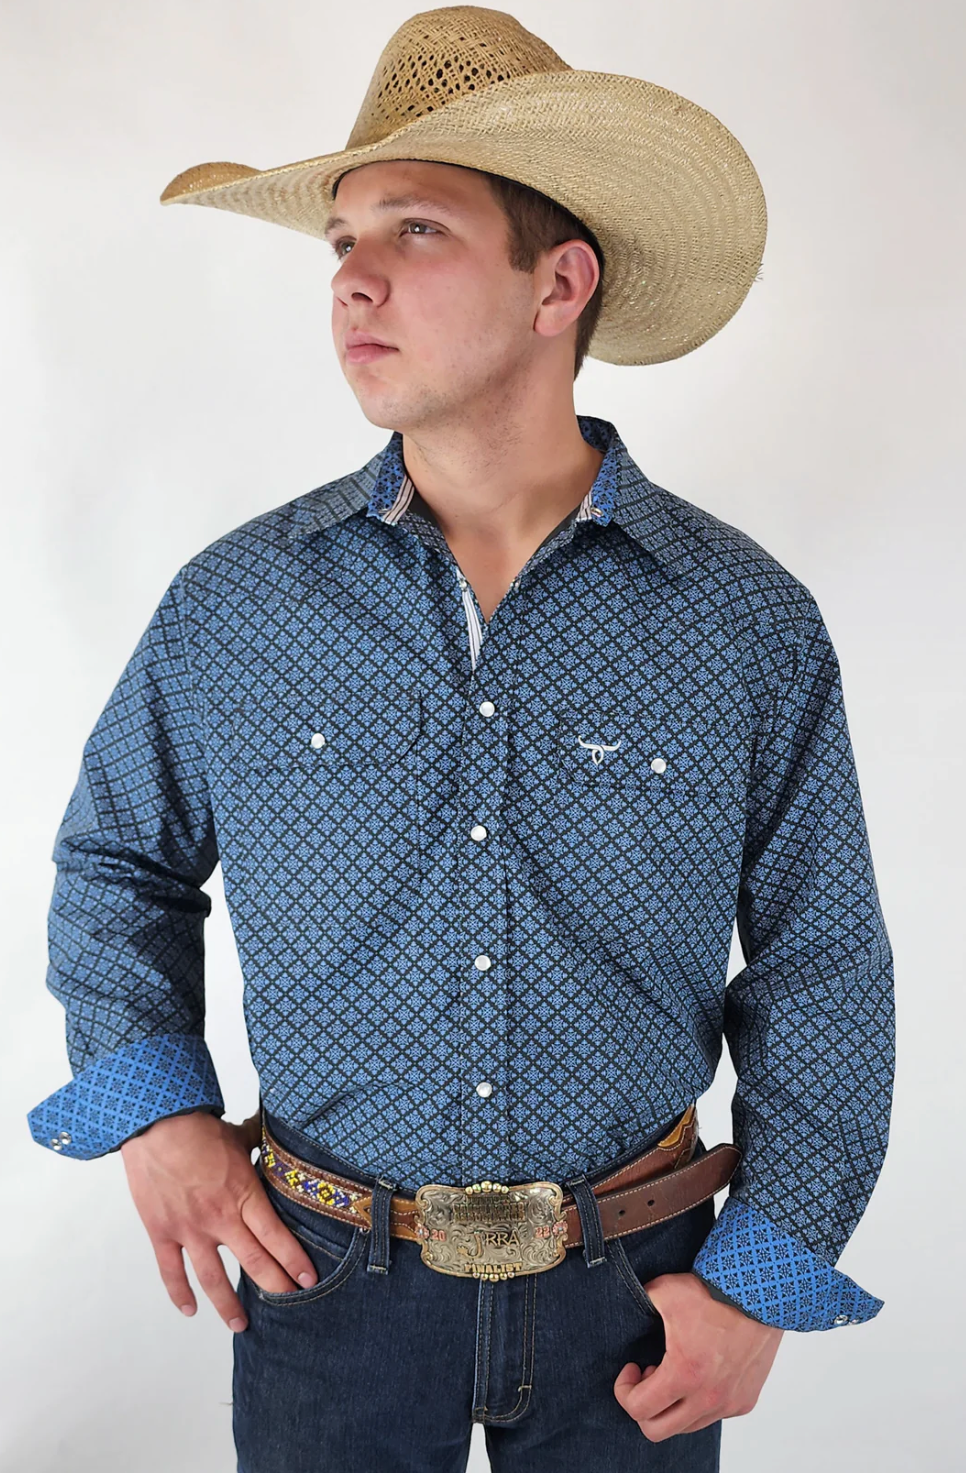 Drover Signature Series - Bandero -Slate Gray and Blue Pearl Snap, Print, Classic Fit Shirt